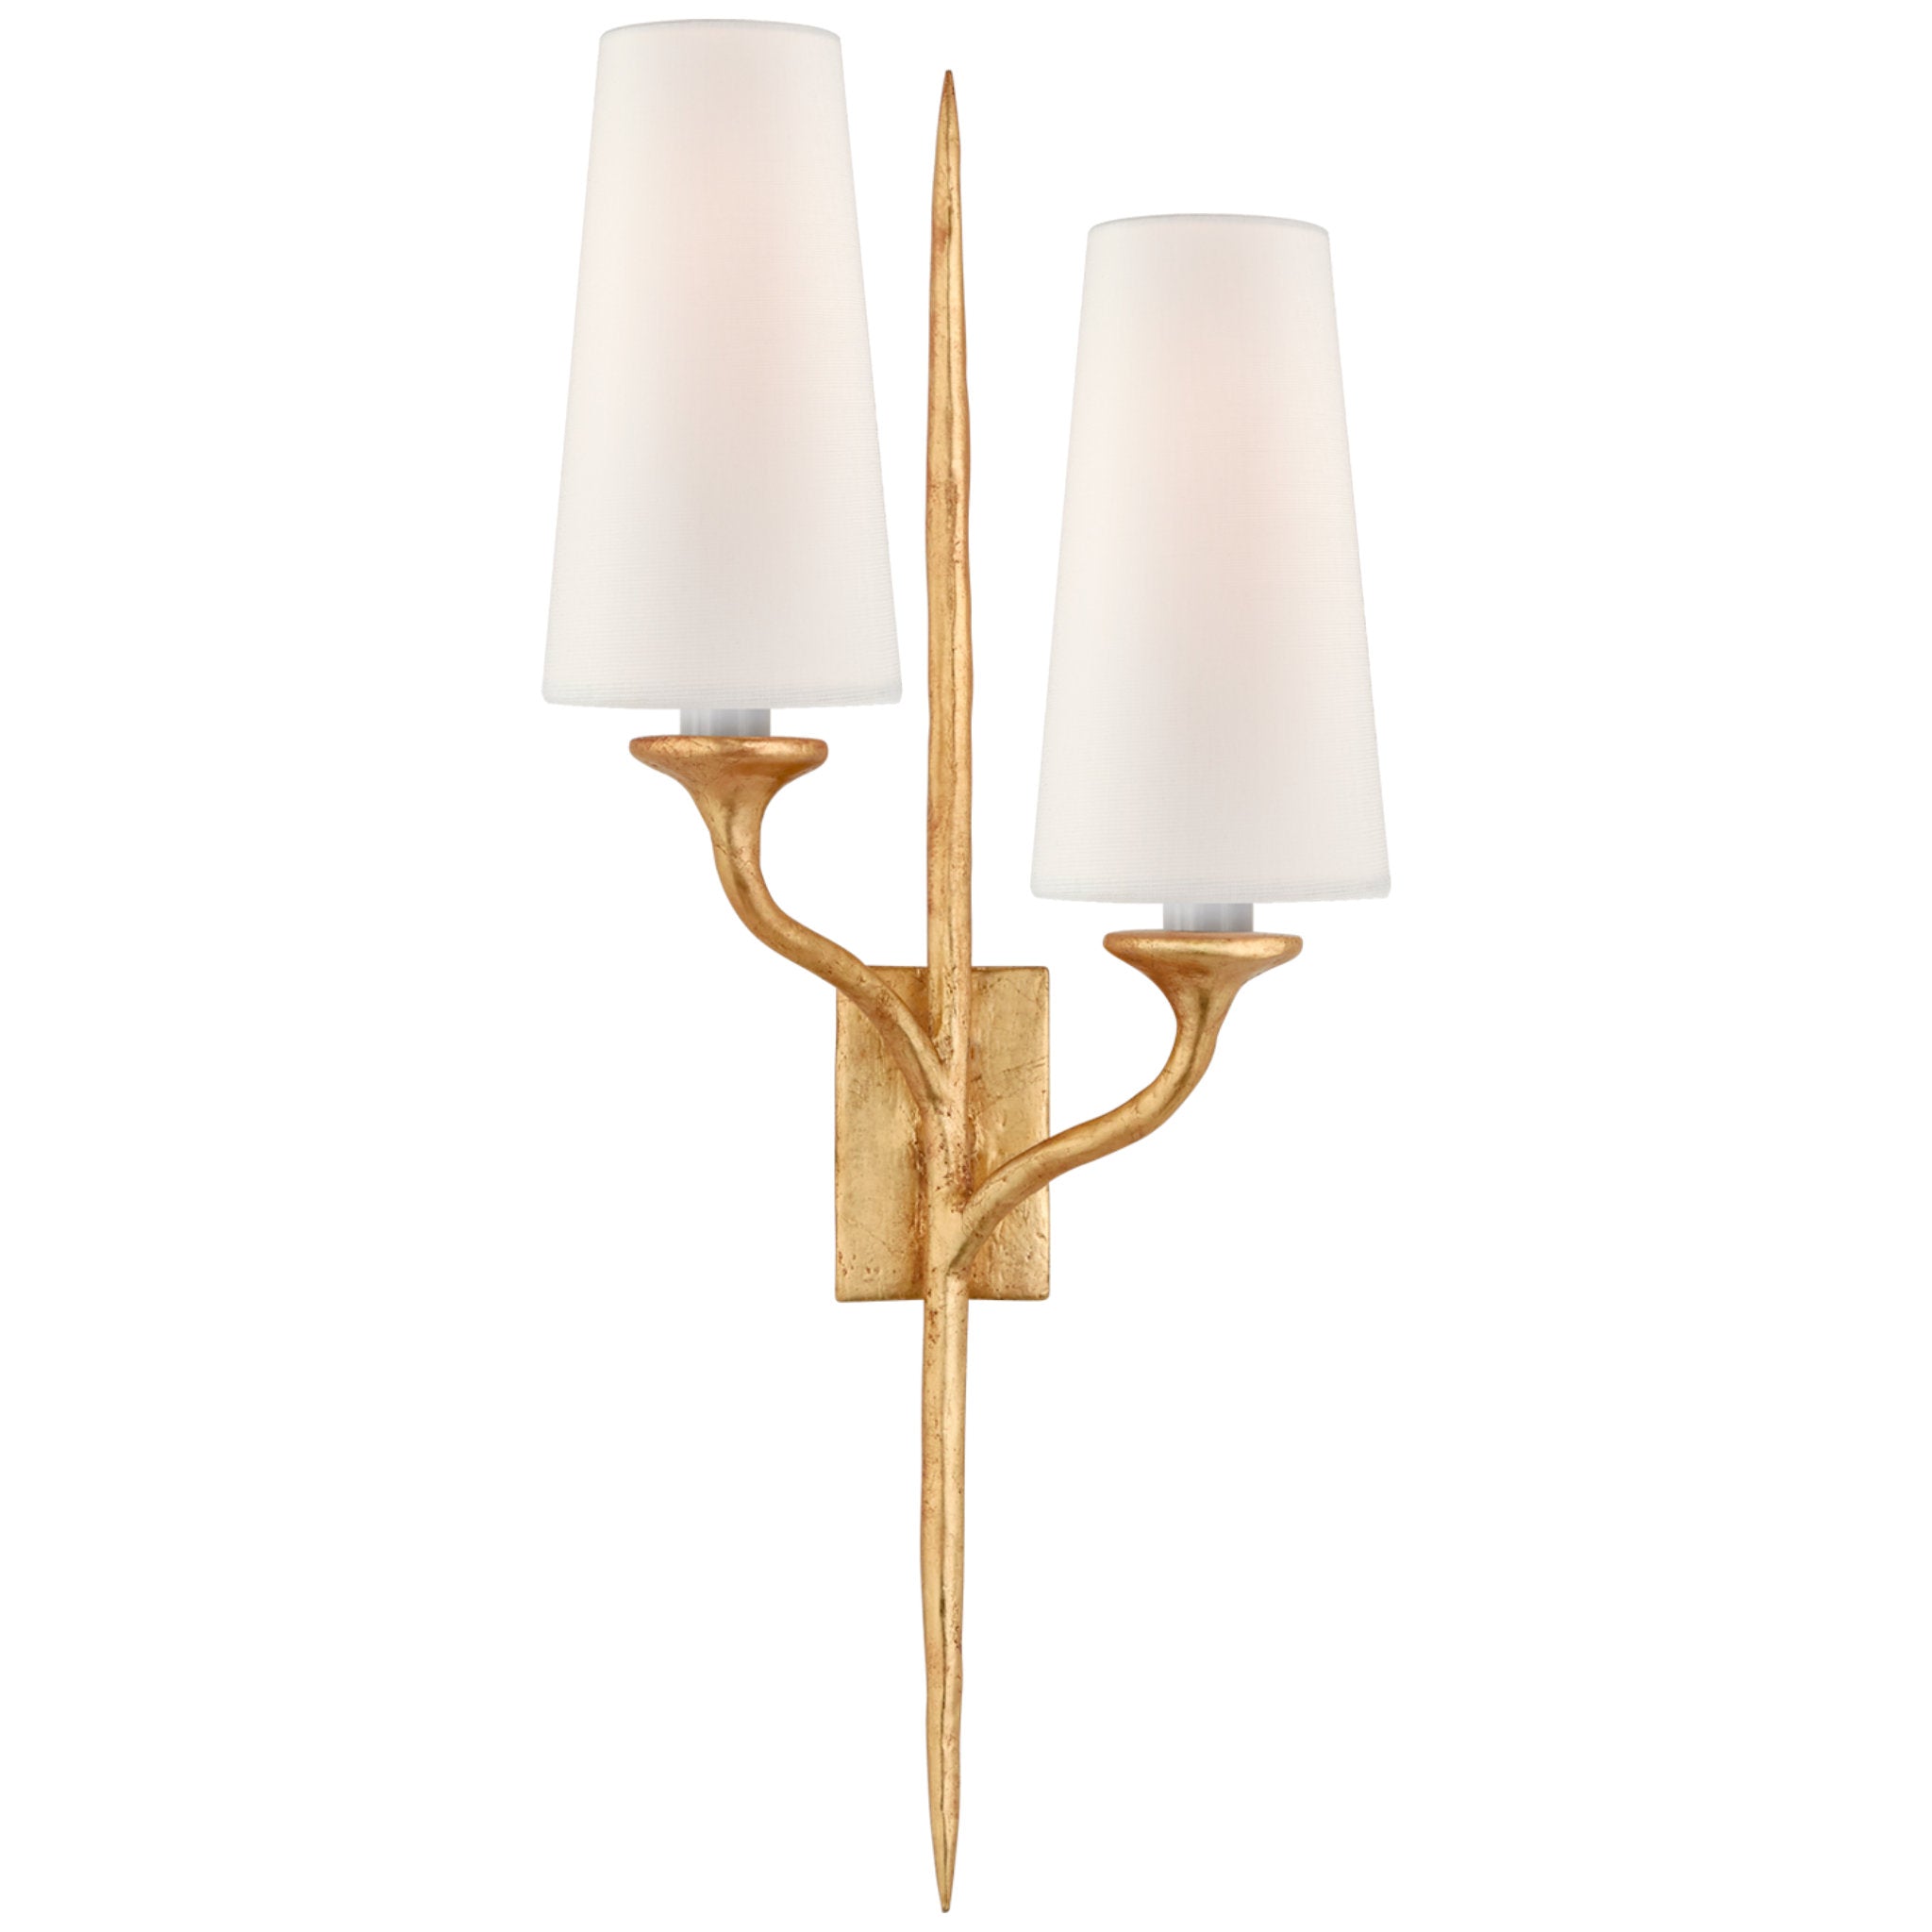 Julie Neill Iberia Double Left Sconce in Antique Gold Leaf with Linen Shades